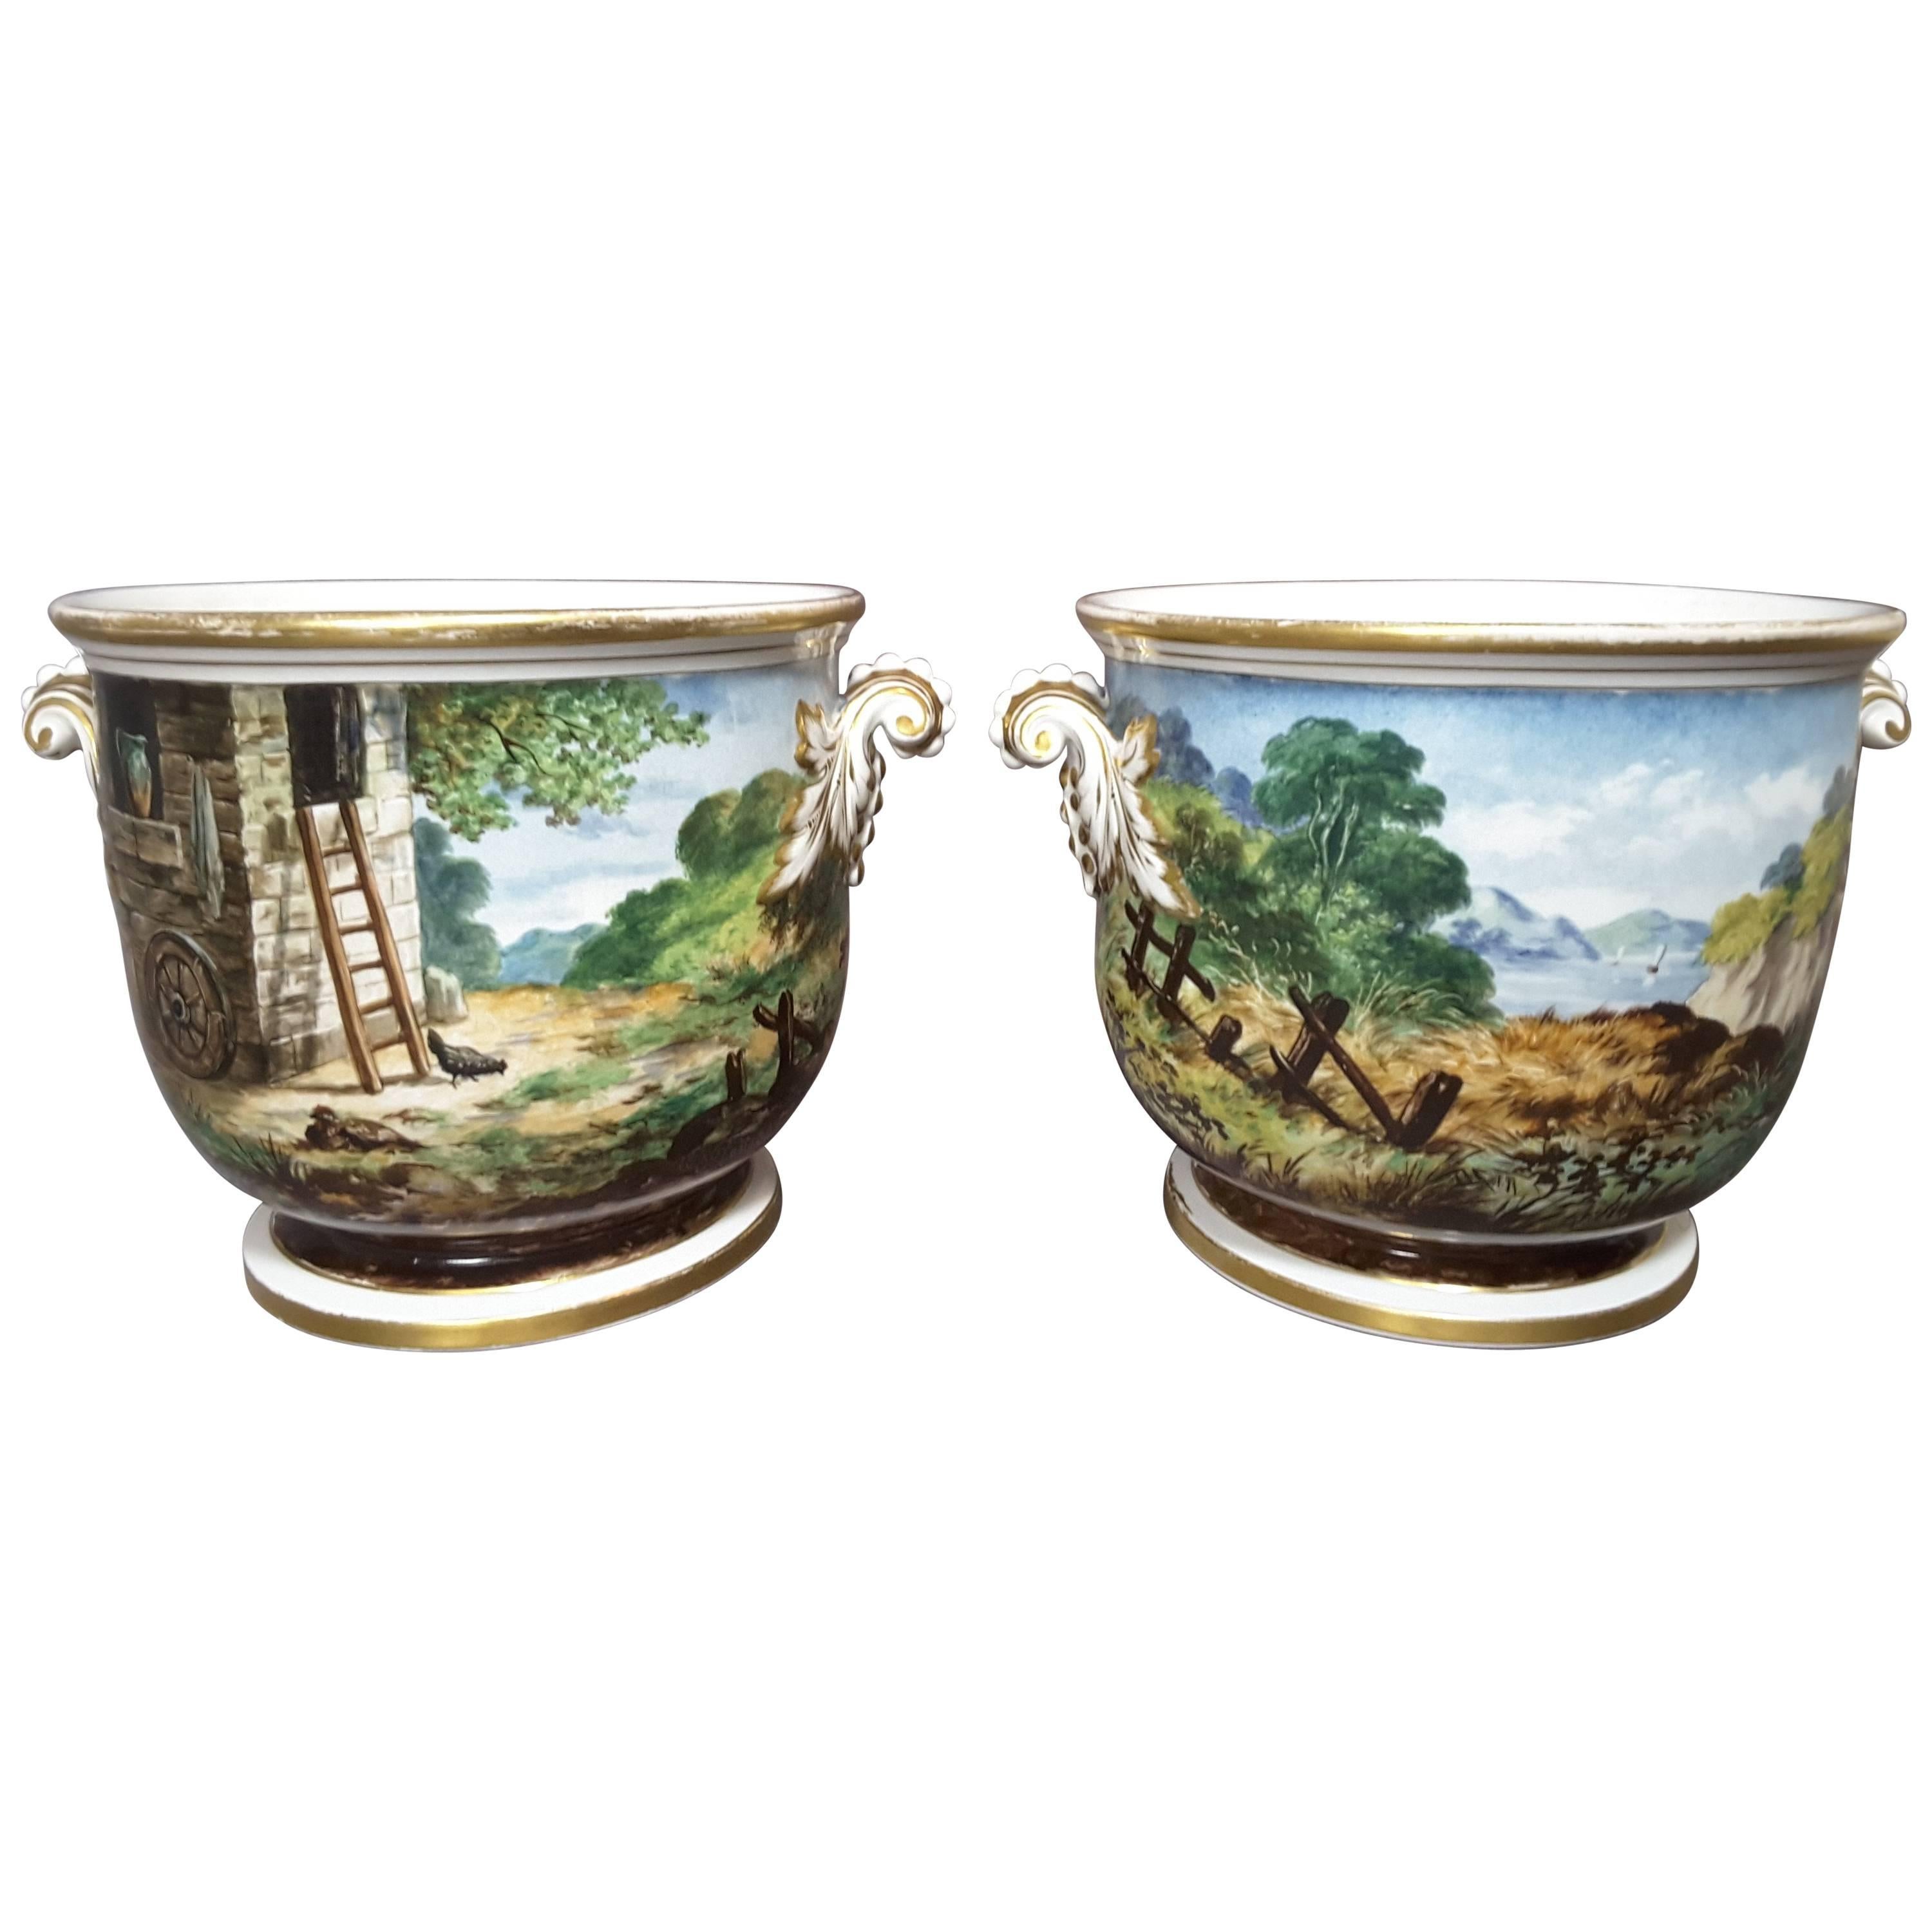 Pair of Georgian English Cache Pots, Hand-Painted and Signed